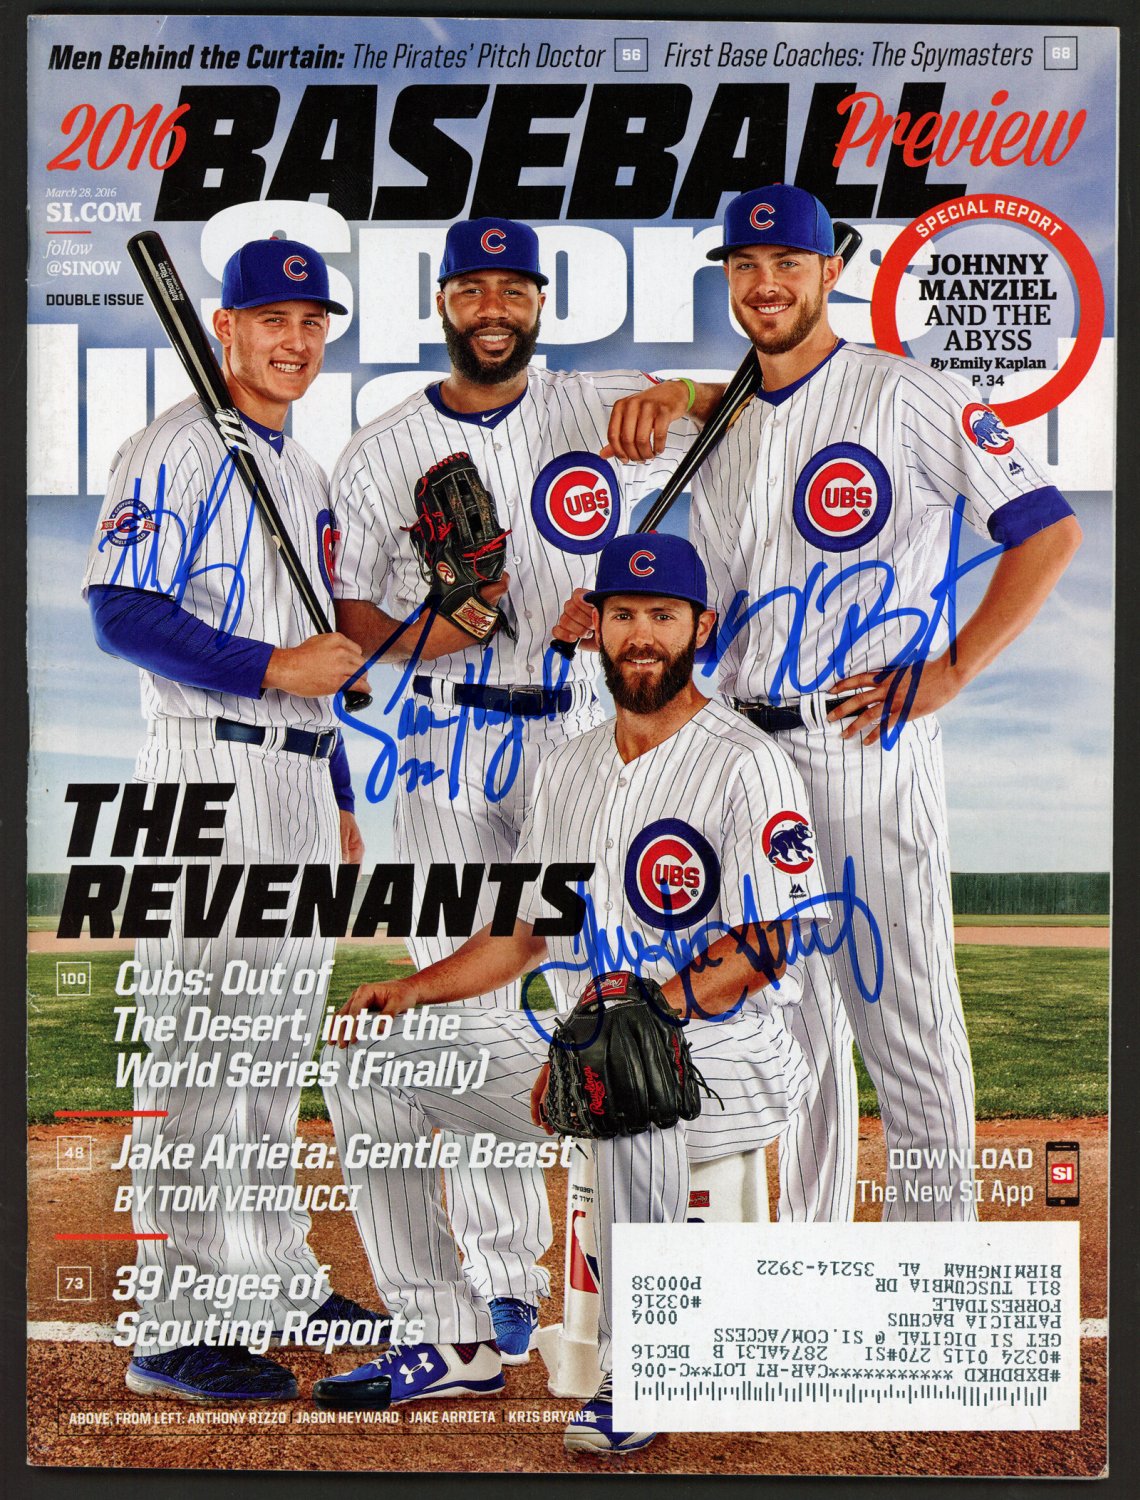 Free download Kris Bryant CHC July 2015 Chicago cubs Pinterest